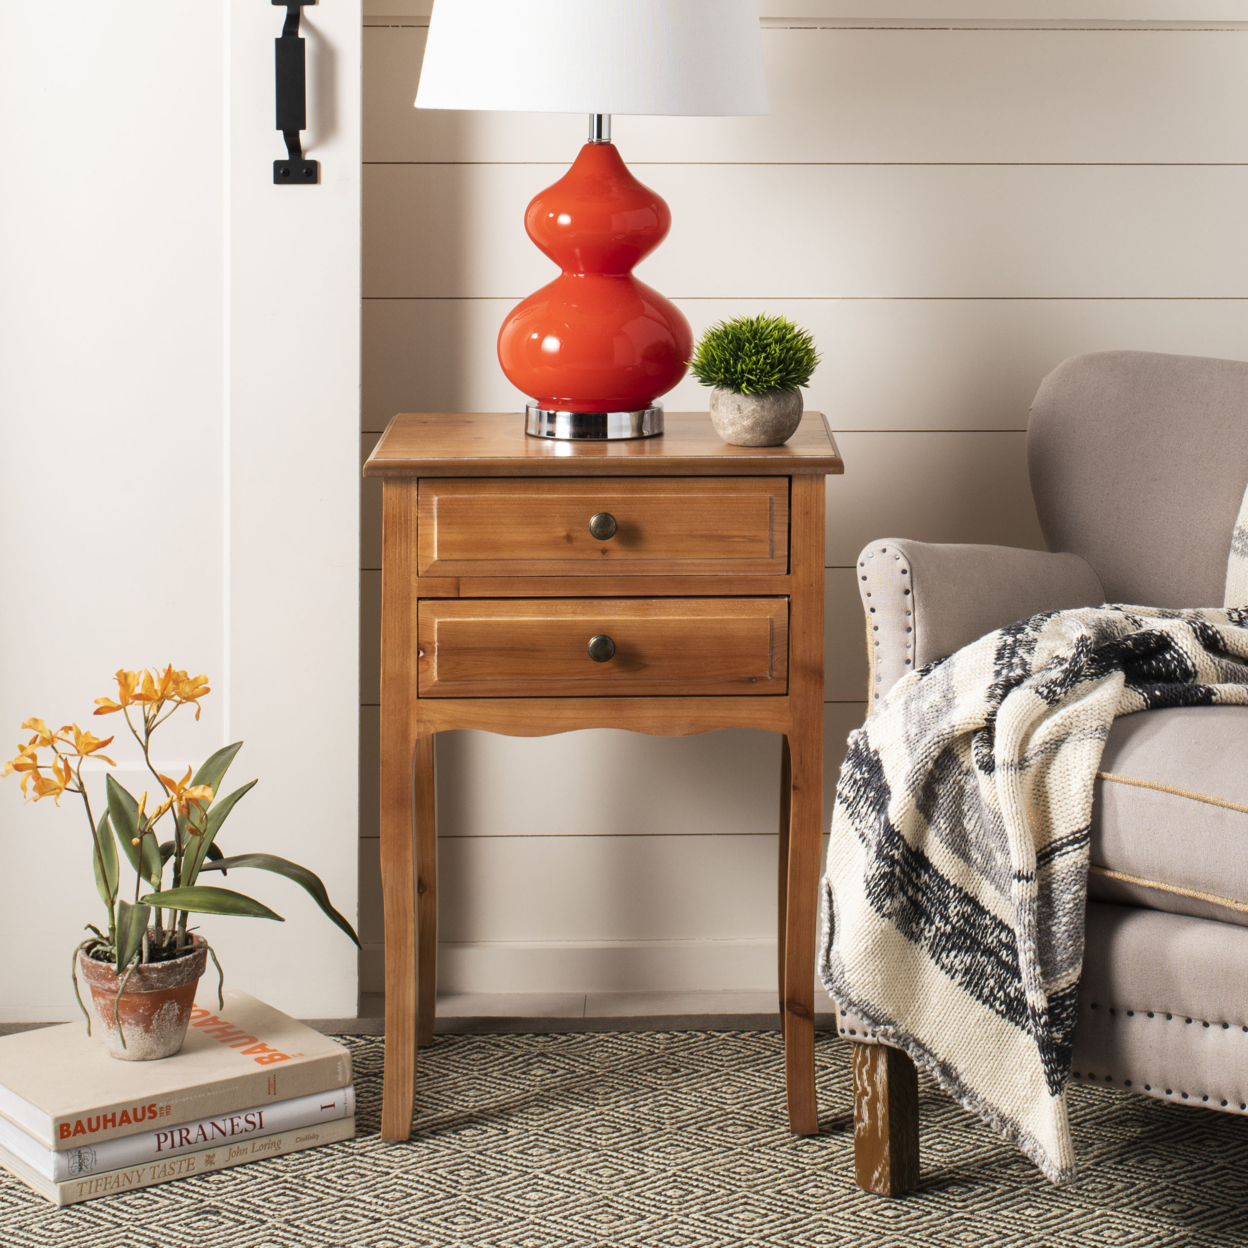 SAFAVIEH Lori End Table With Storage Drawers Red Maple